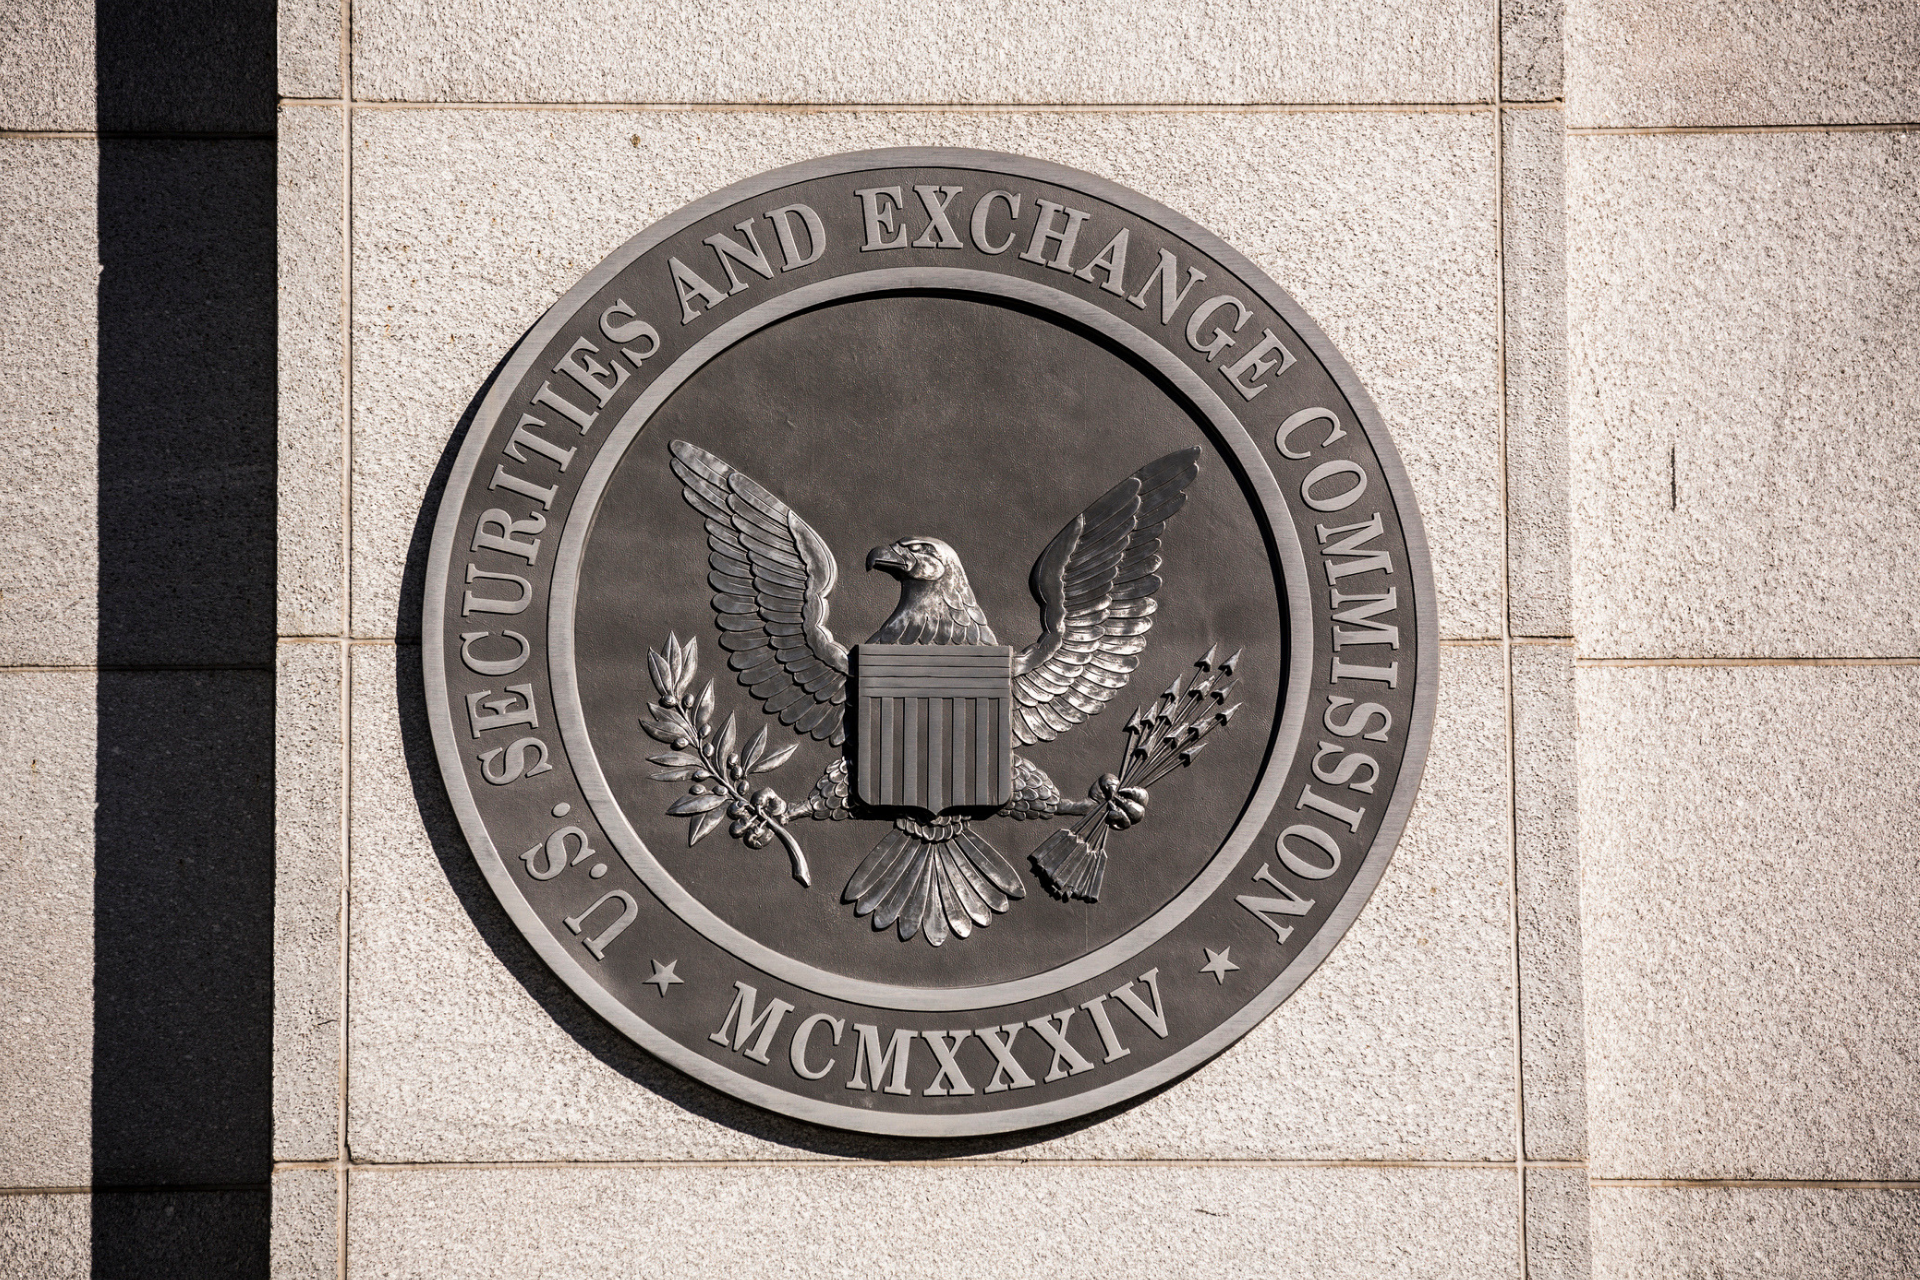 SEC’s New Executive Compensation Clawback Rules 